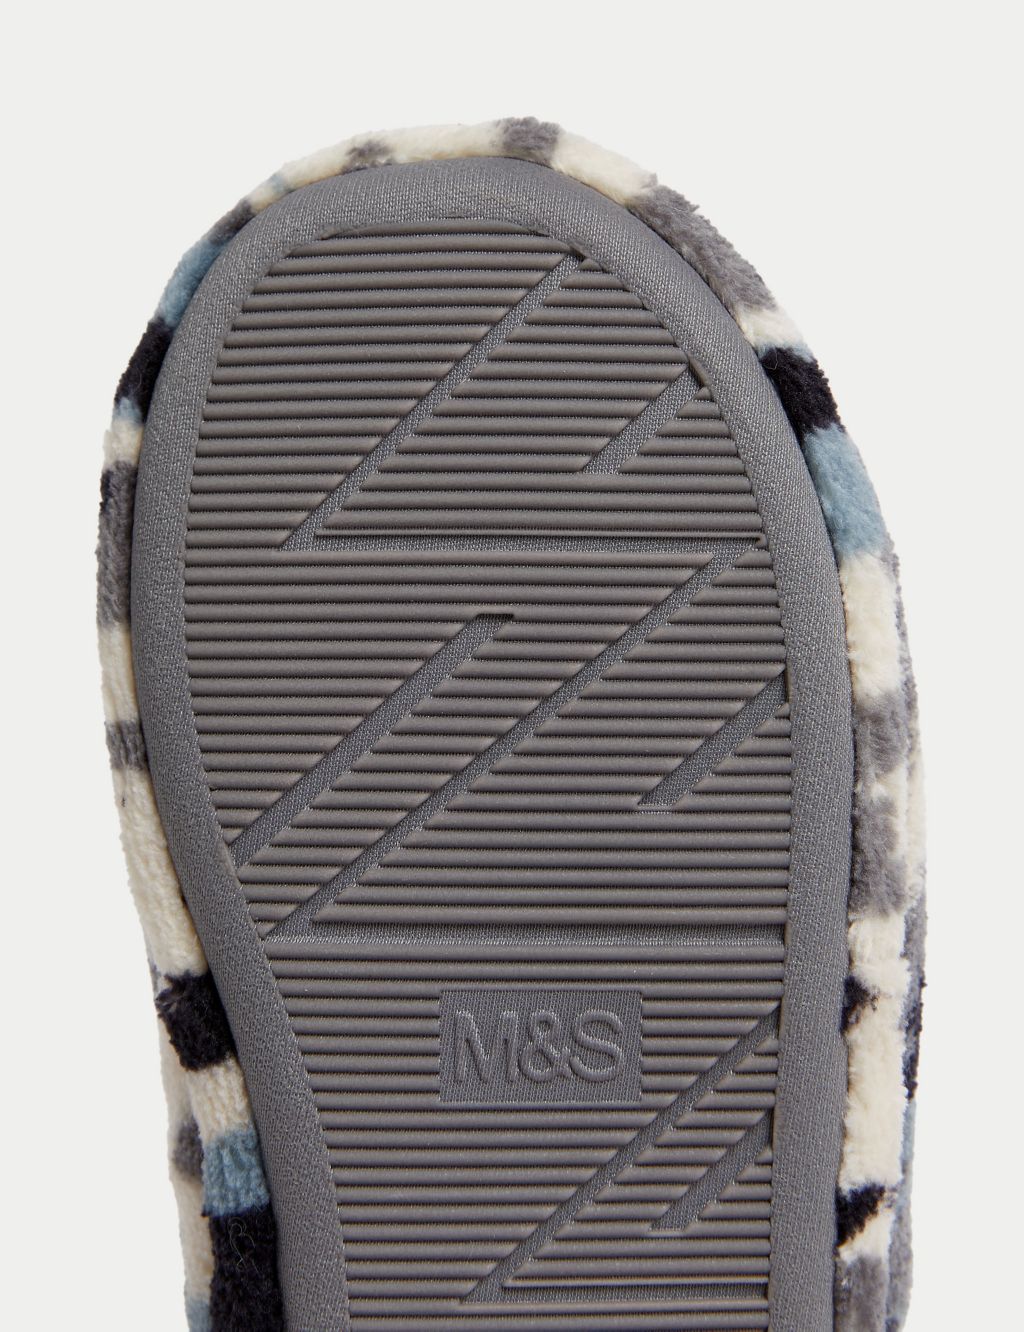 Kids' Camouflage Slipper Boots (4 Small - 7 Large) image 4